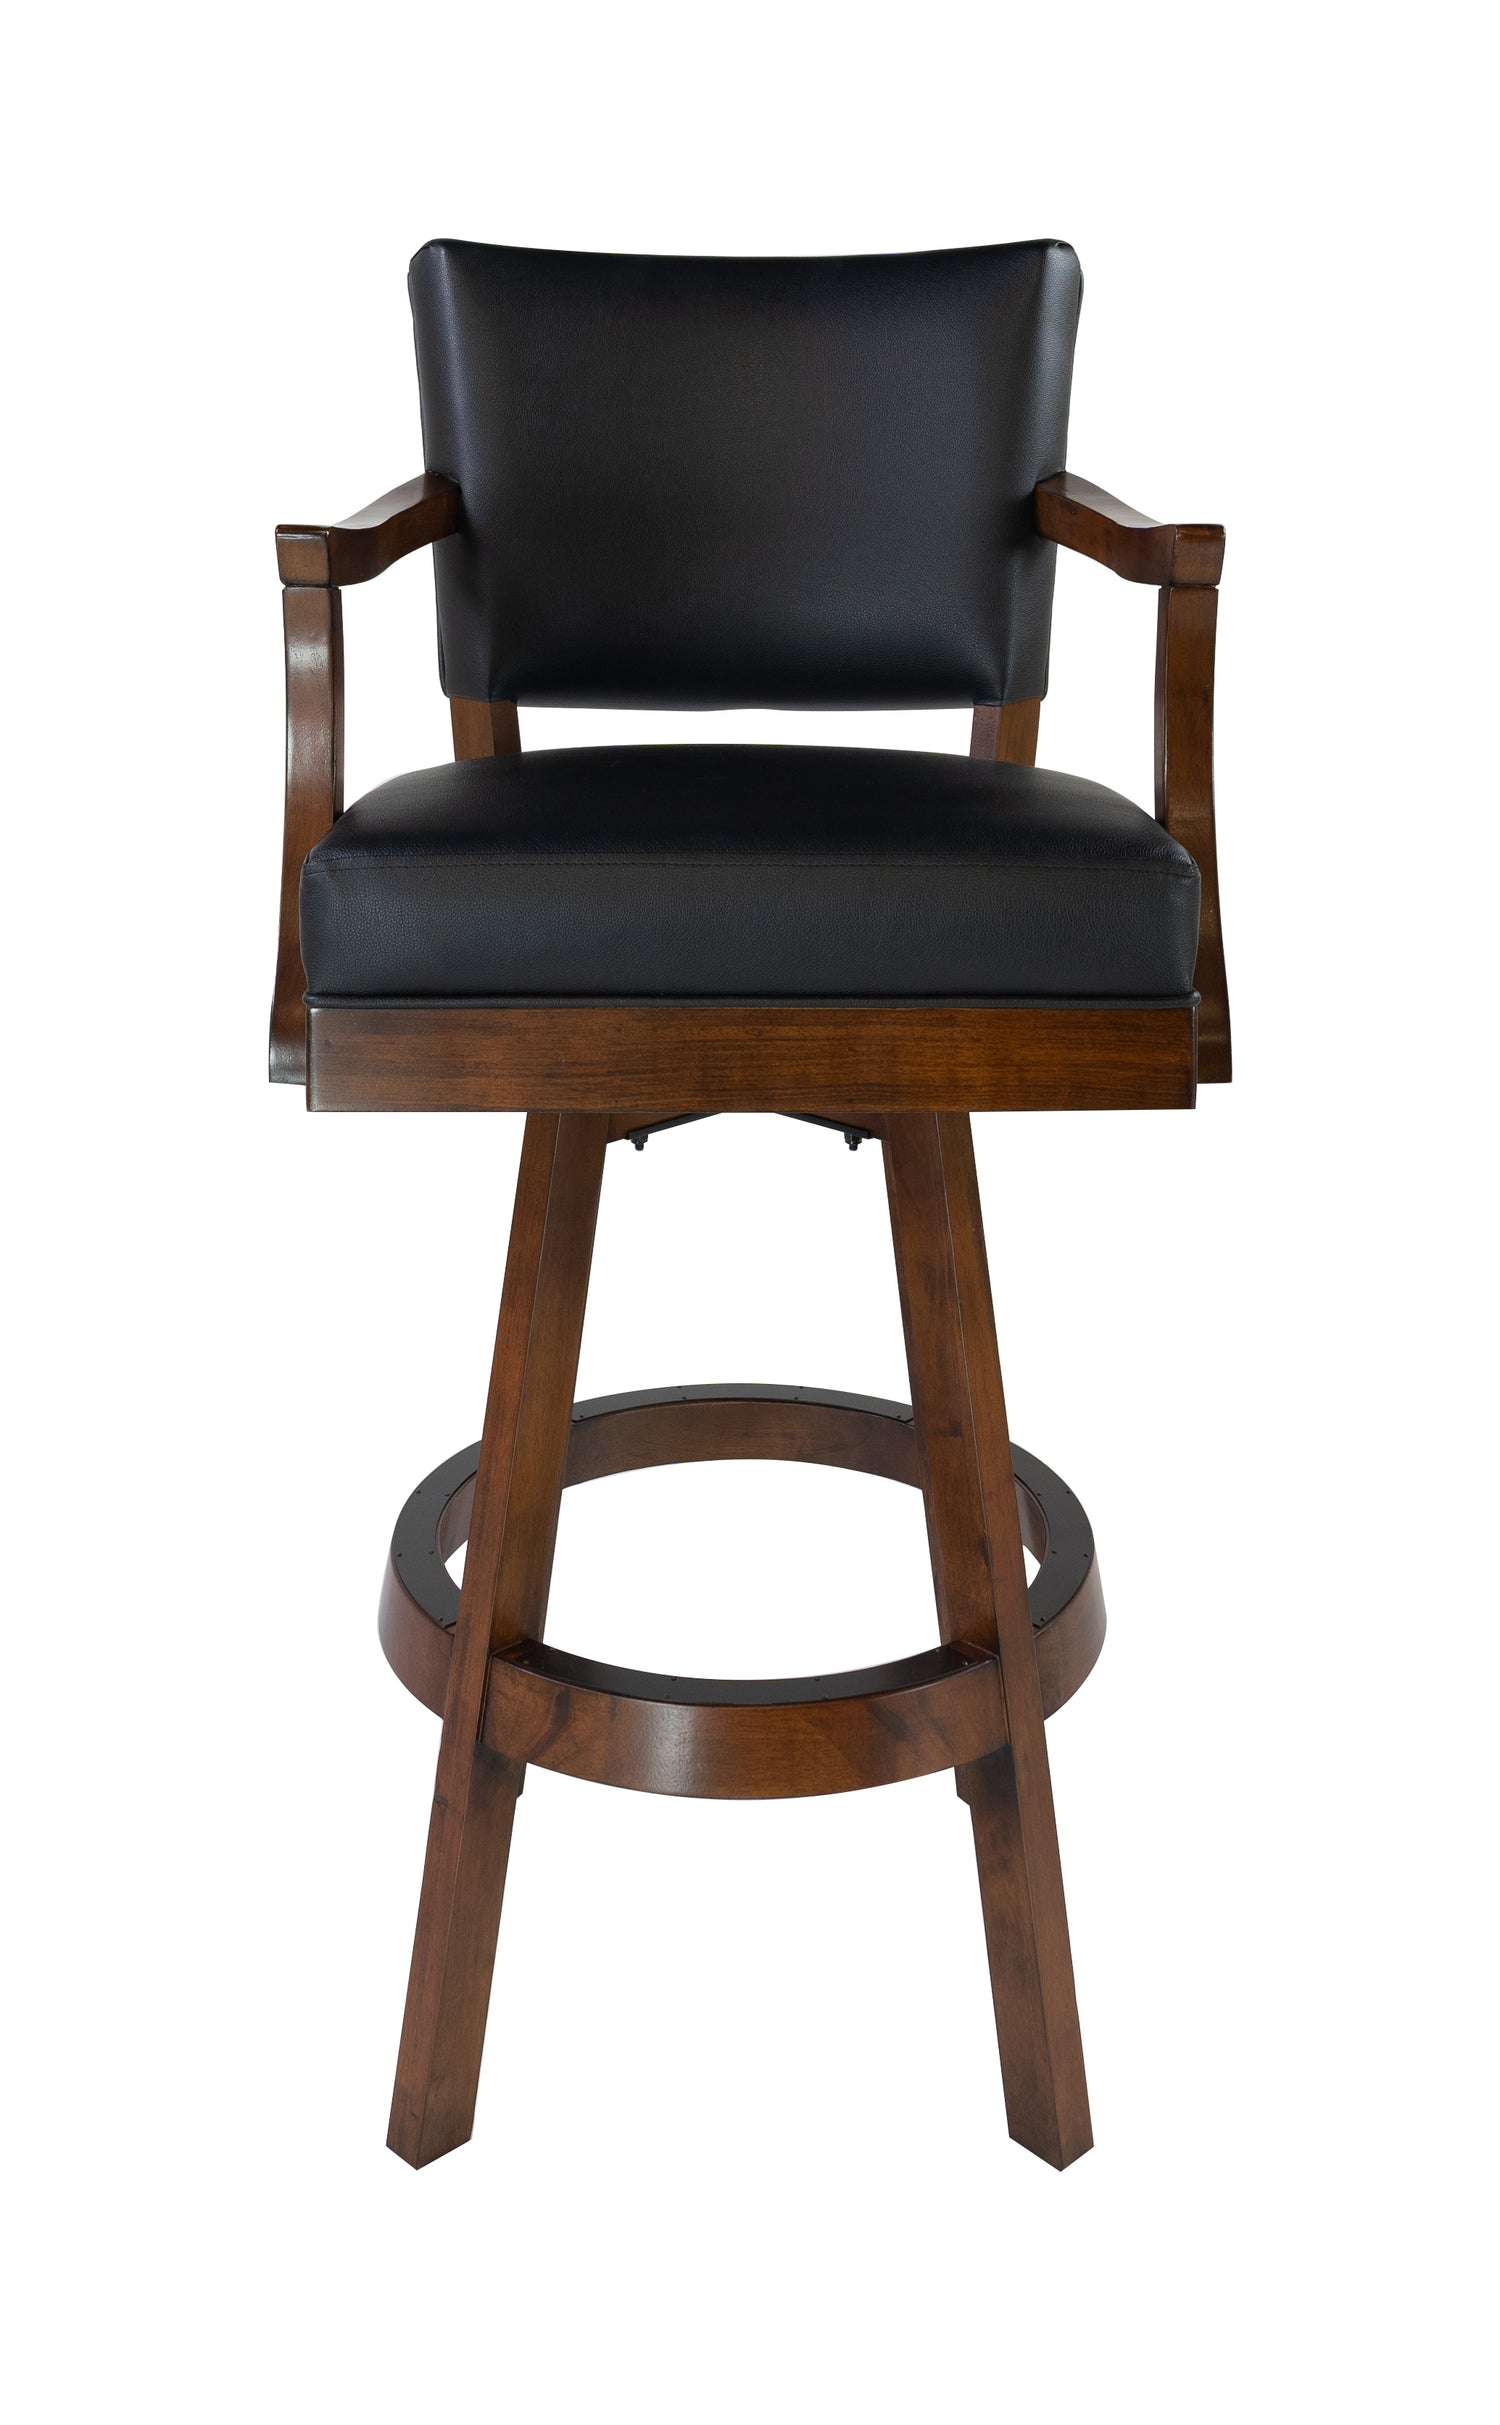 Legacy Billiards Classic Backed Barstool with Arms in Gunshot Finish Front View